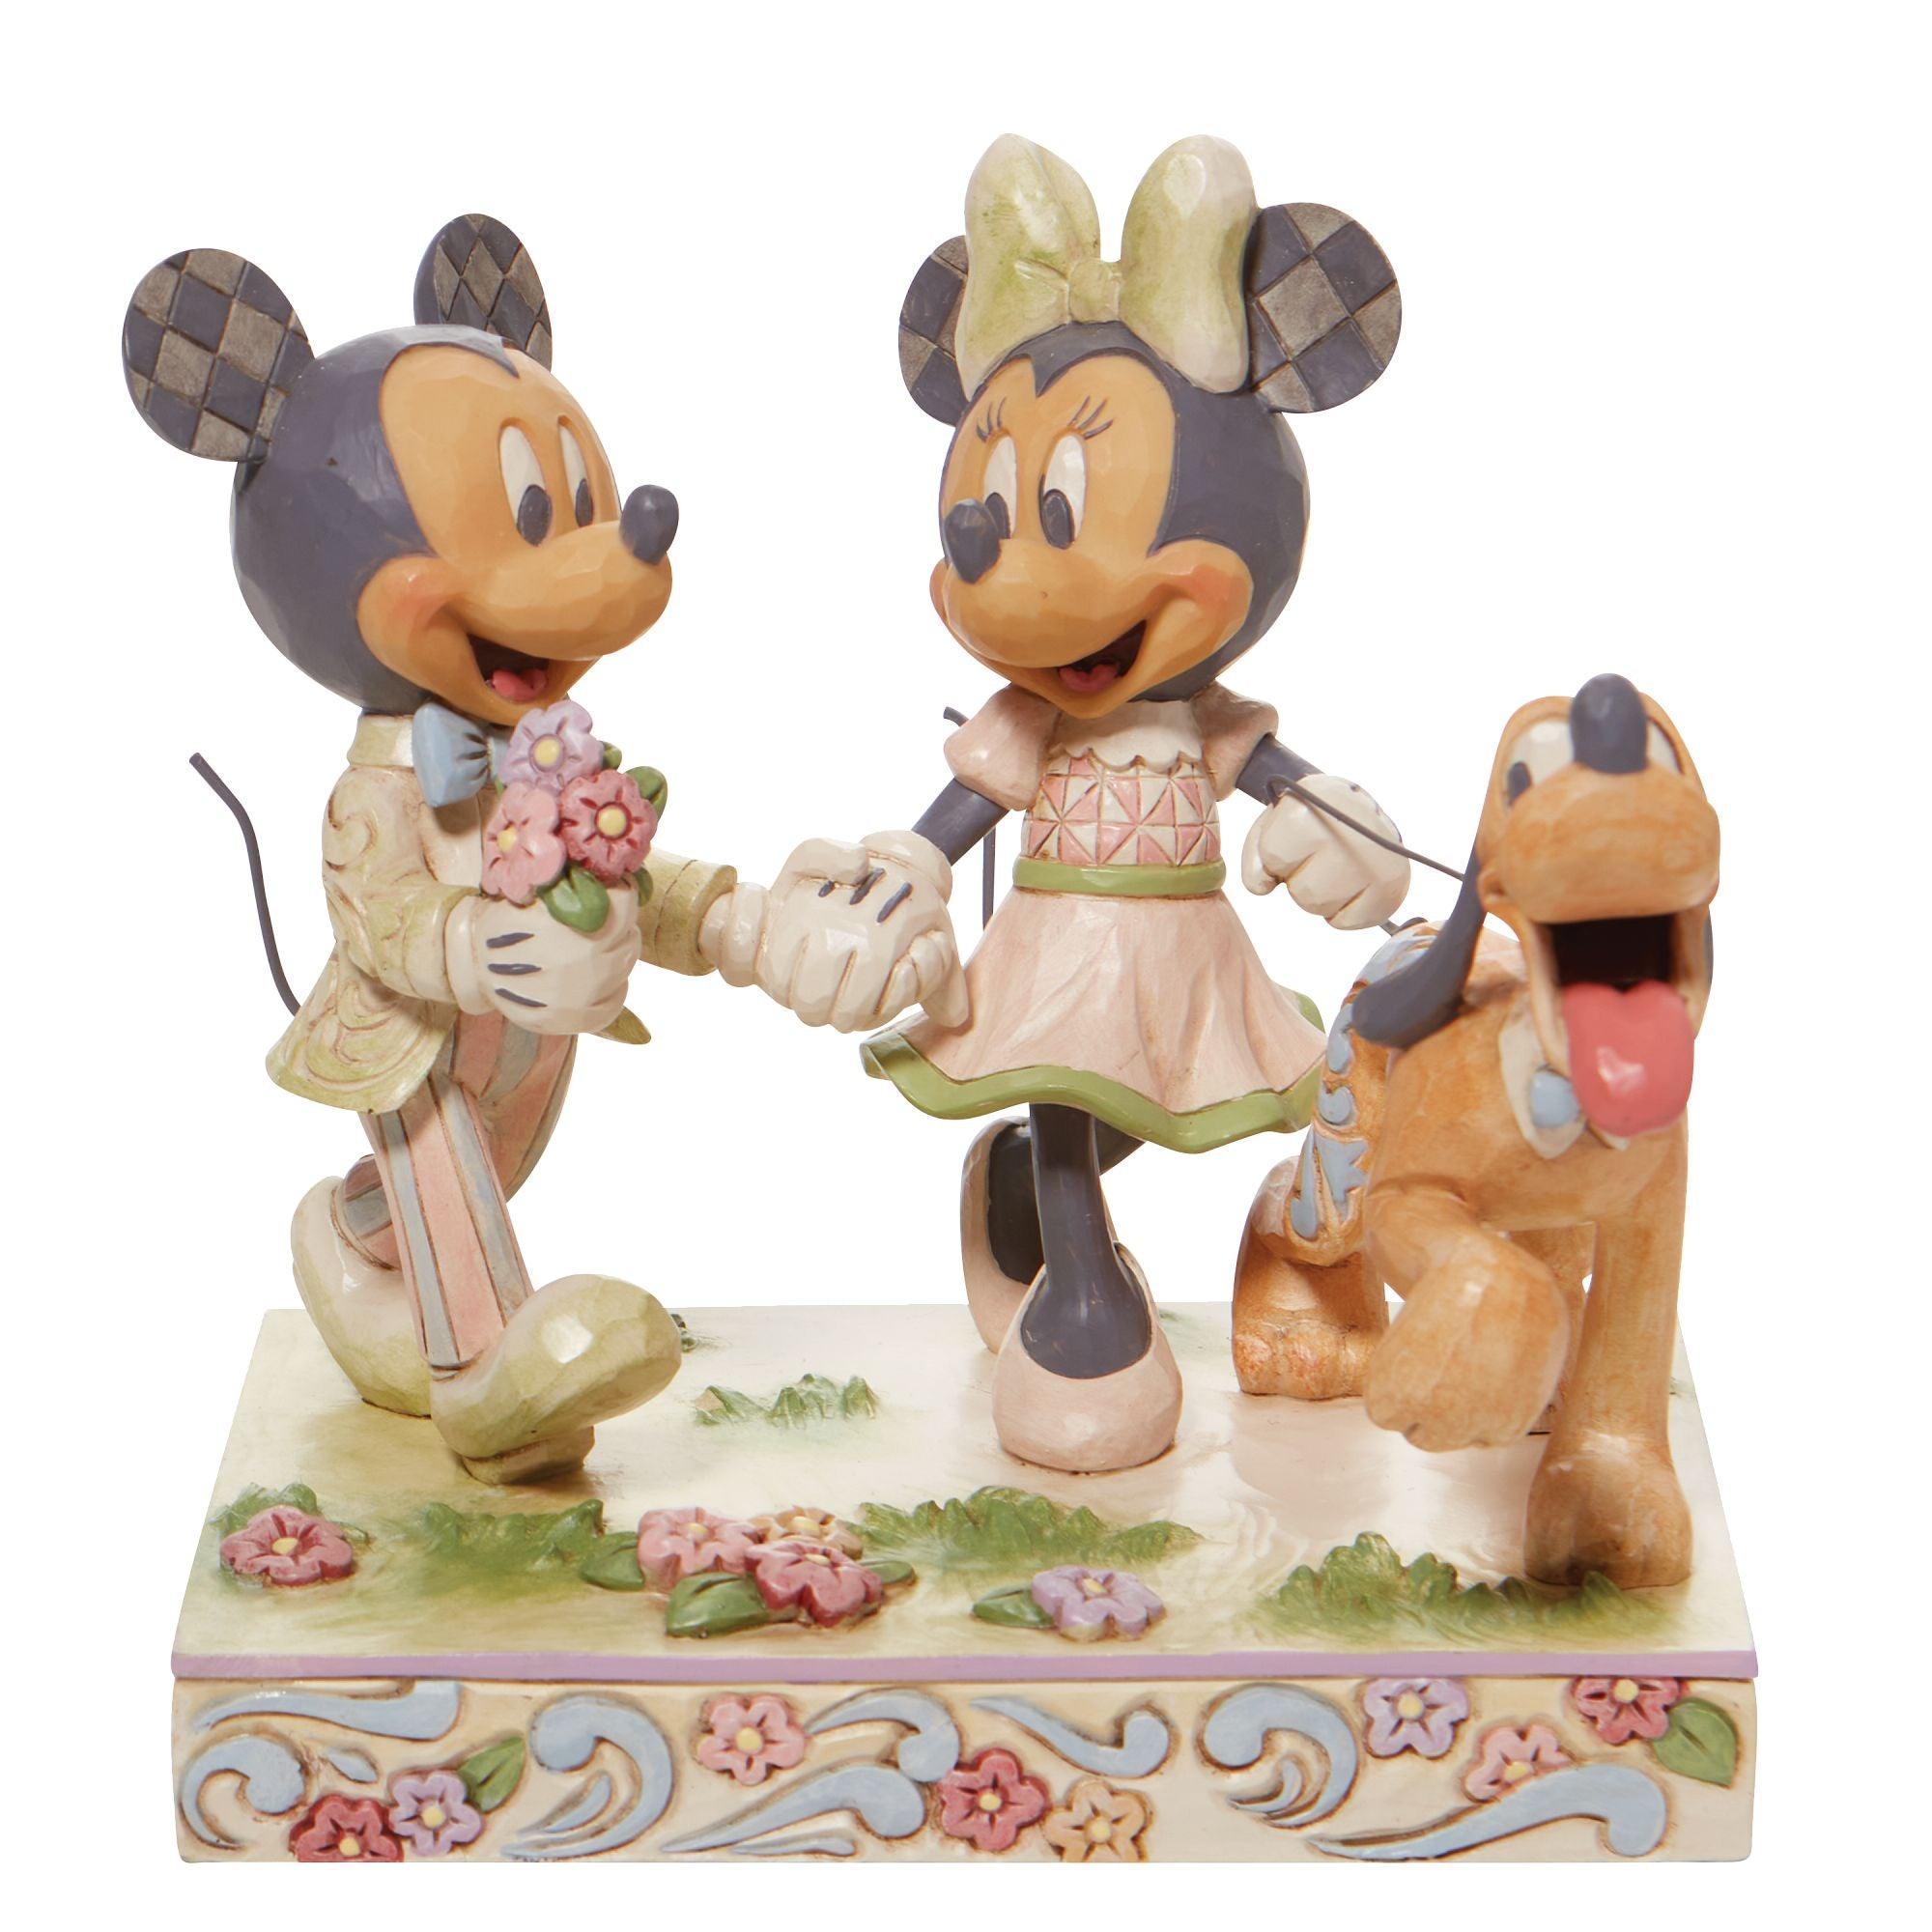 Spring Mickey, Minnie and Pluto Figurine - Disney Traditions by